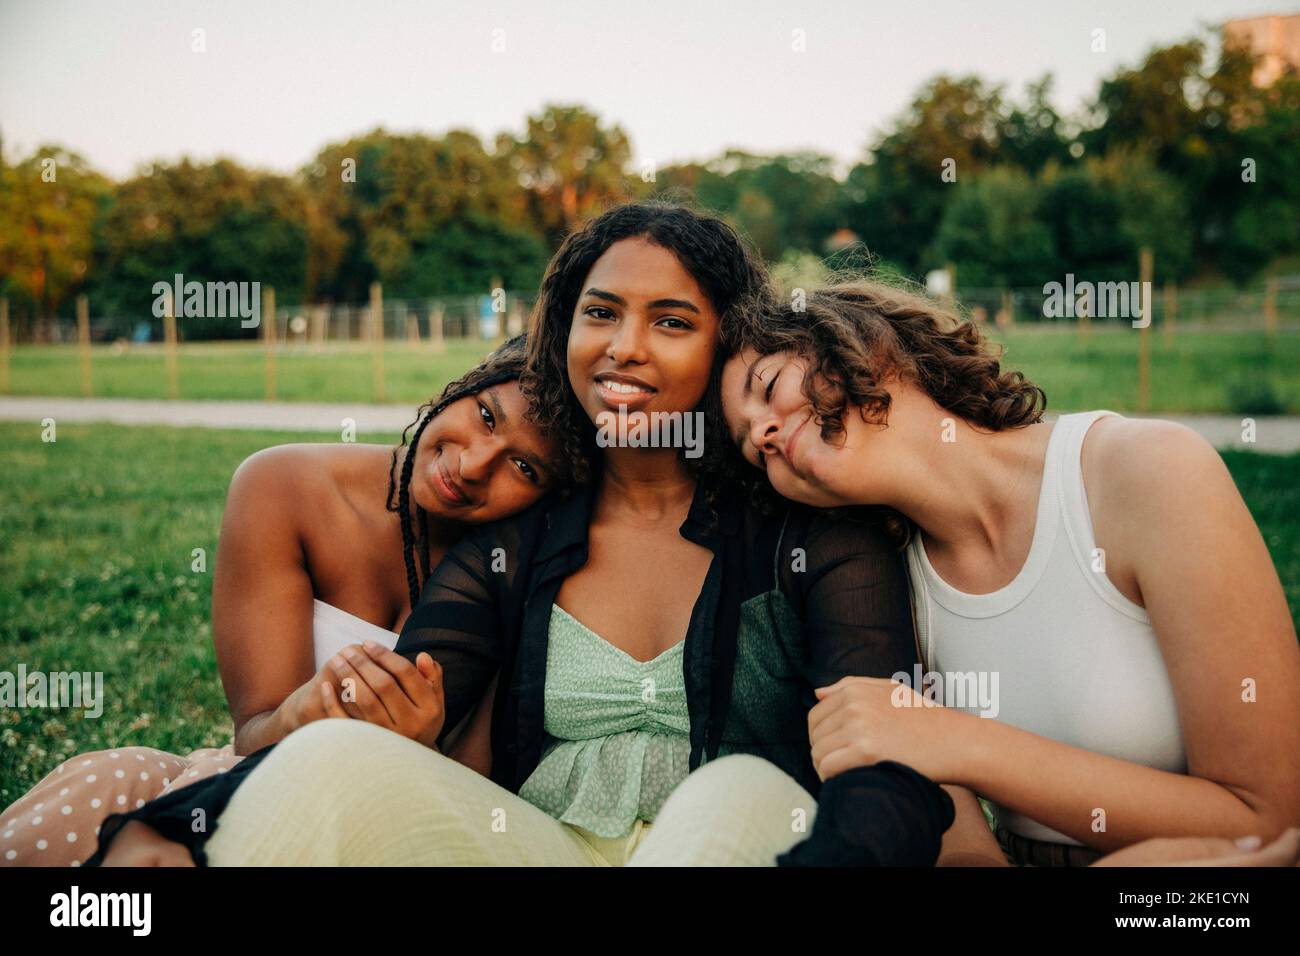 Portrait of teenage girl sitting amidst female friends at park Stock Photo